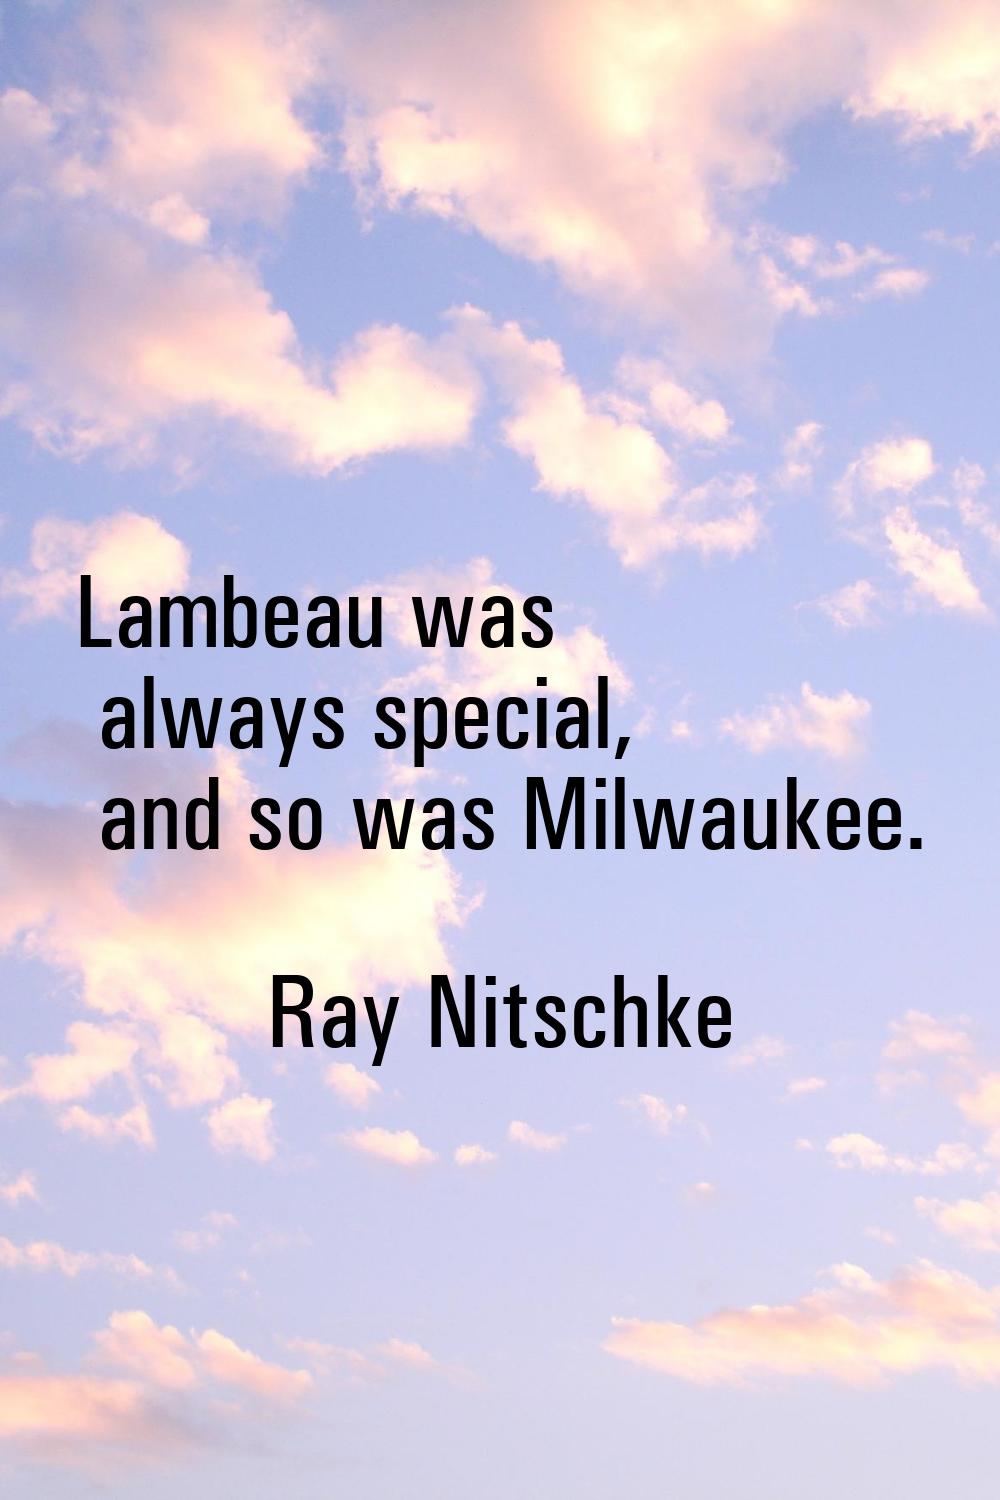 Lambeau was always special, and so was Milwaukee.